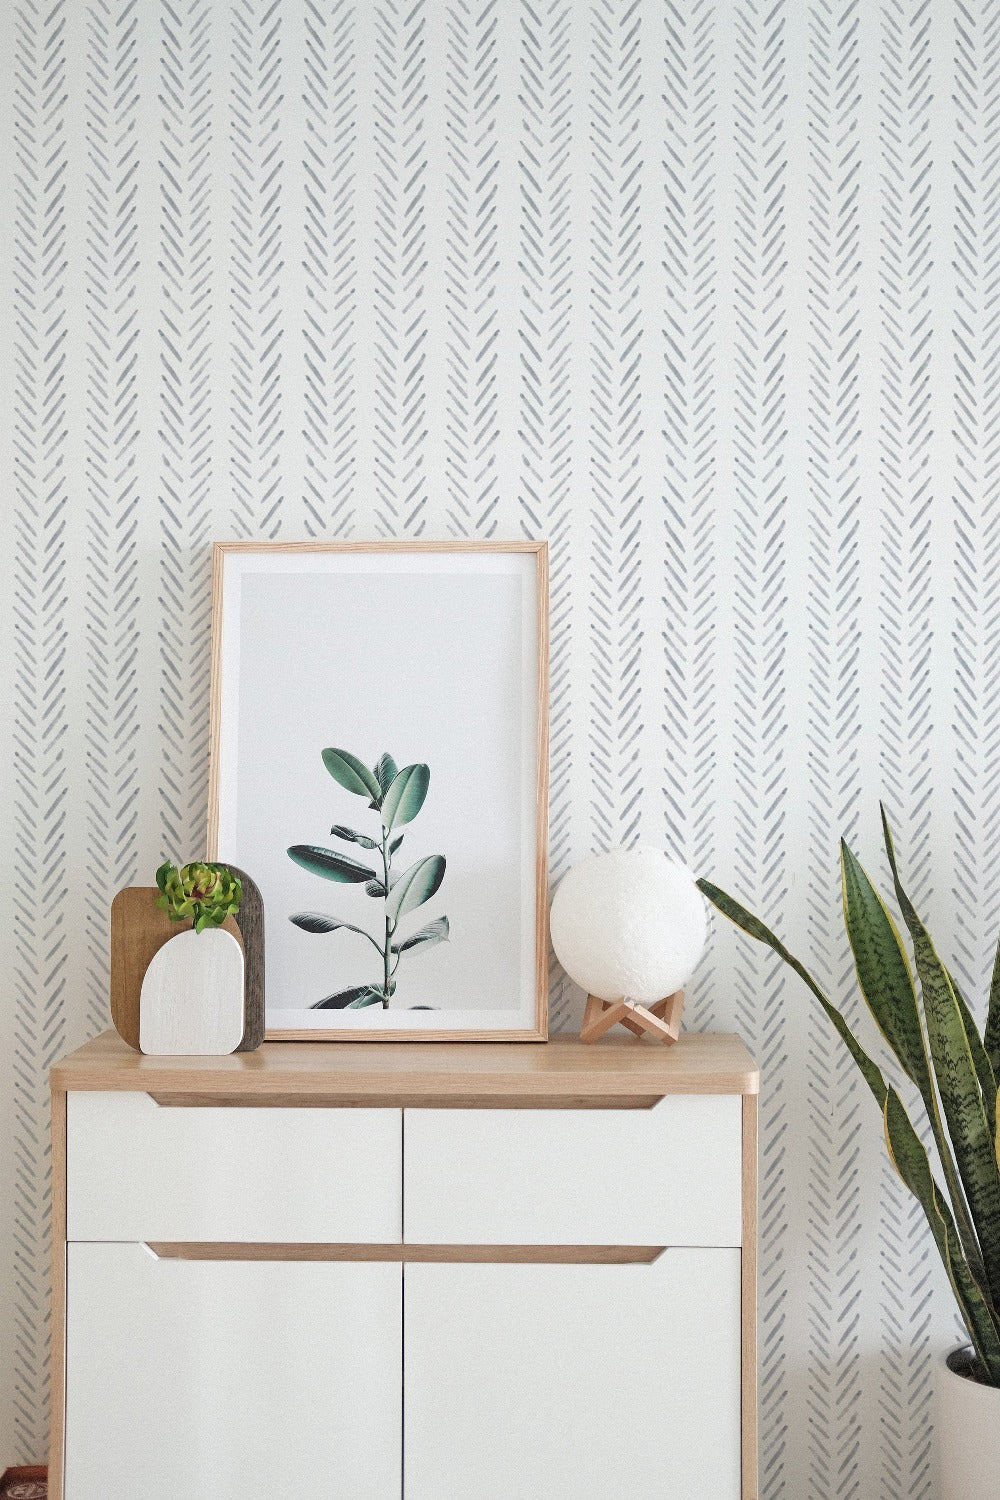 Minimalist and stylish room with Hand Painted Chevron Wallpaper, a framed botanical print, a white round lamp, and a wooden sideboard with decorative items.